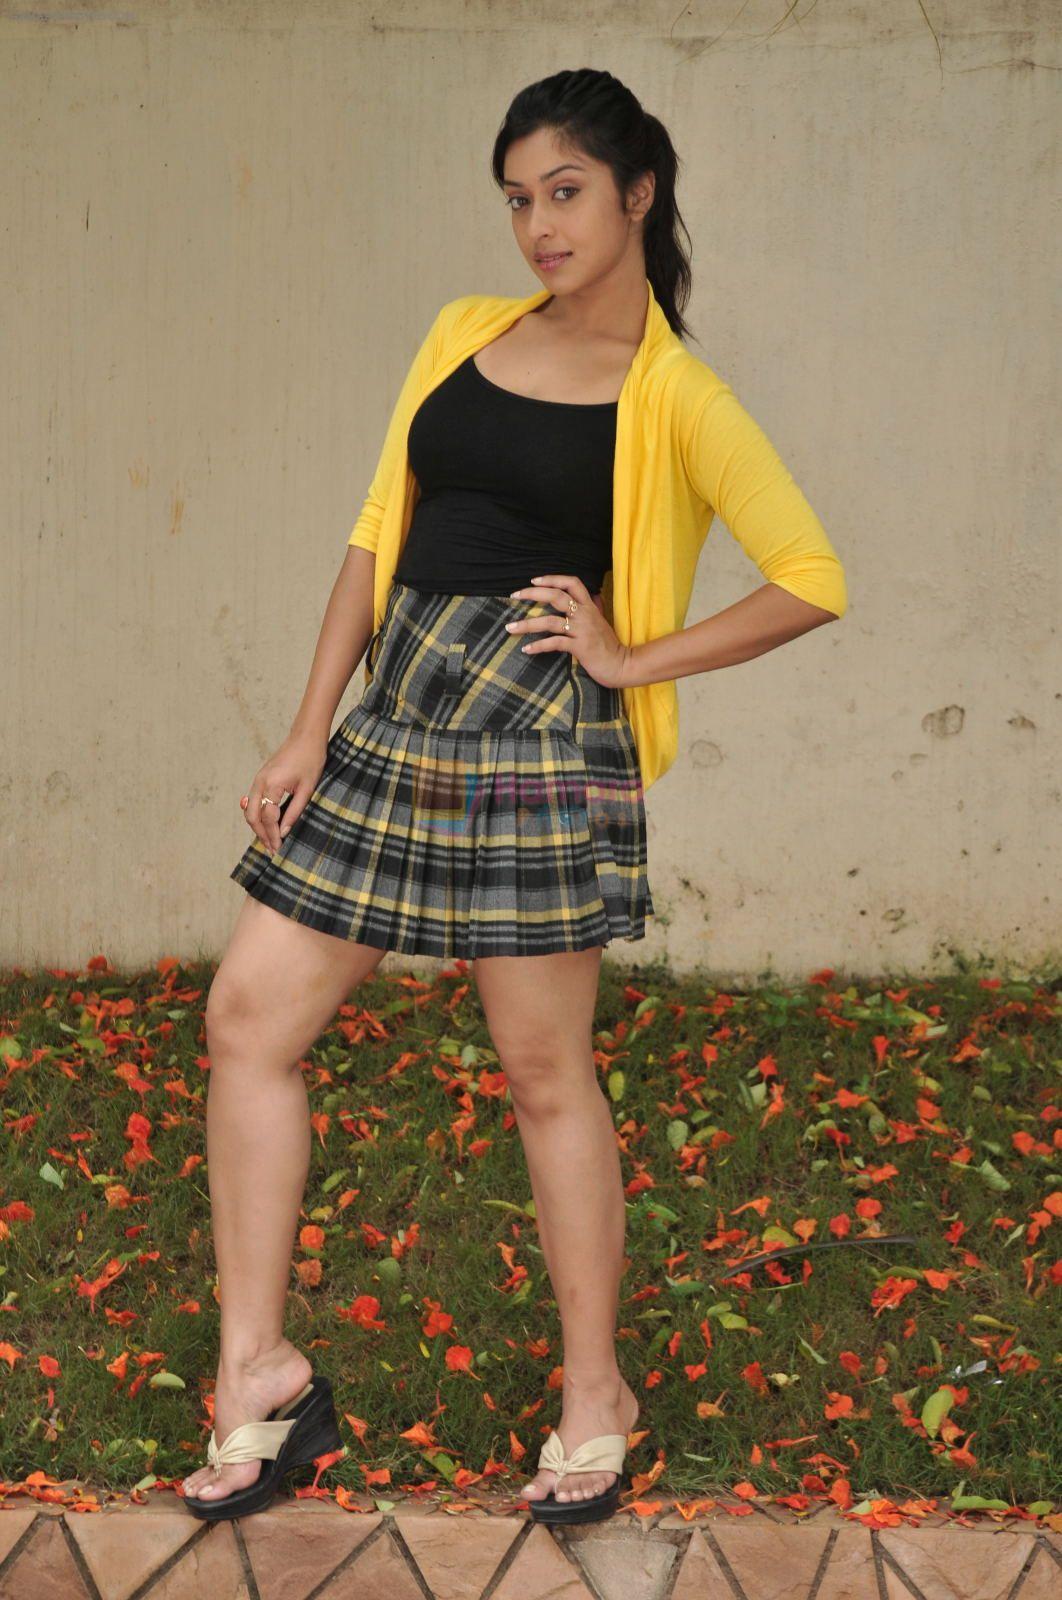 Payal Ghosh in a casual shoot on July 26, 2010